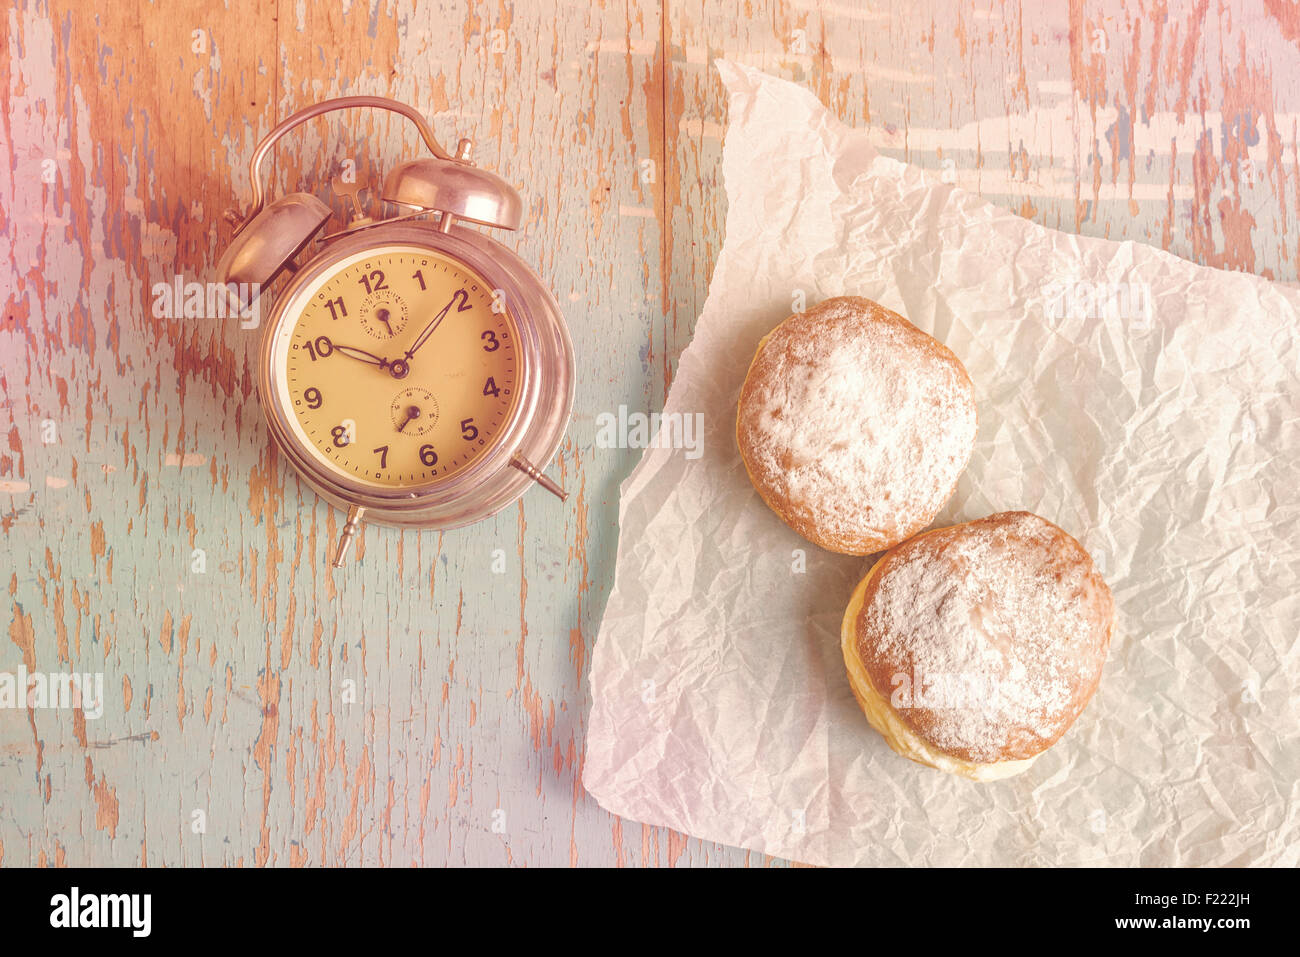 Sweet sugary donuts and vintage alarm clock on rustic wooden kitchen table, top view of tasty bakery doughnuts Stock Photo